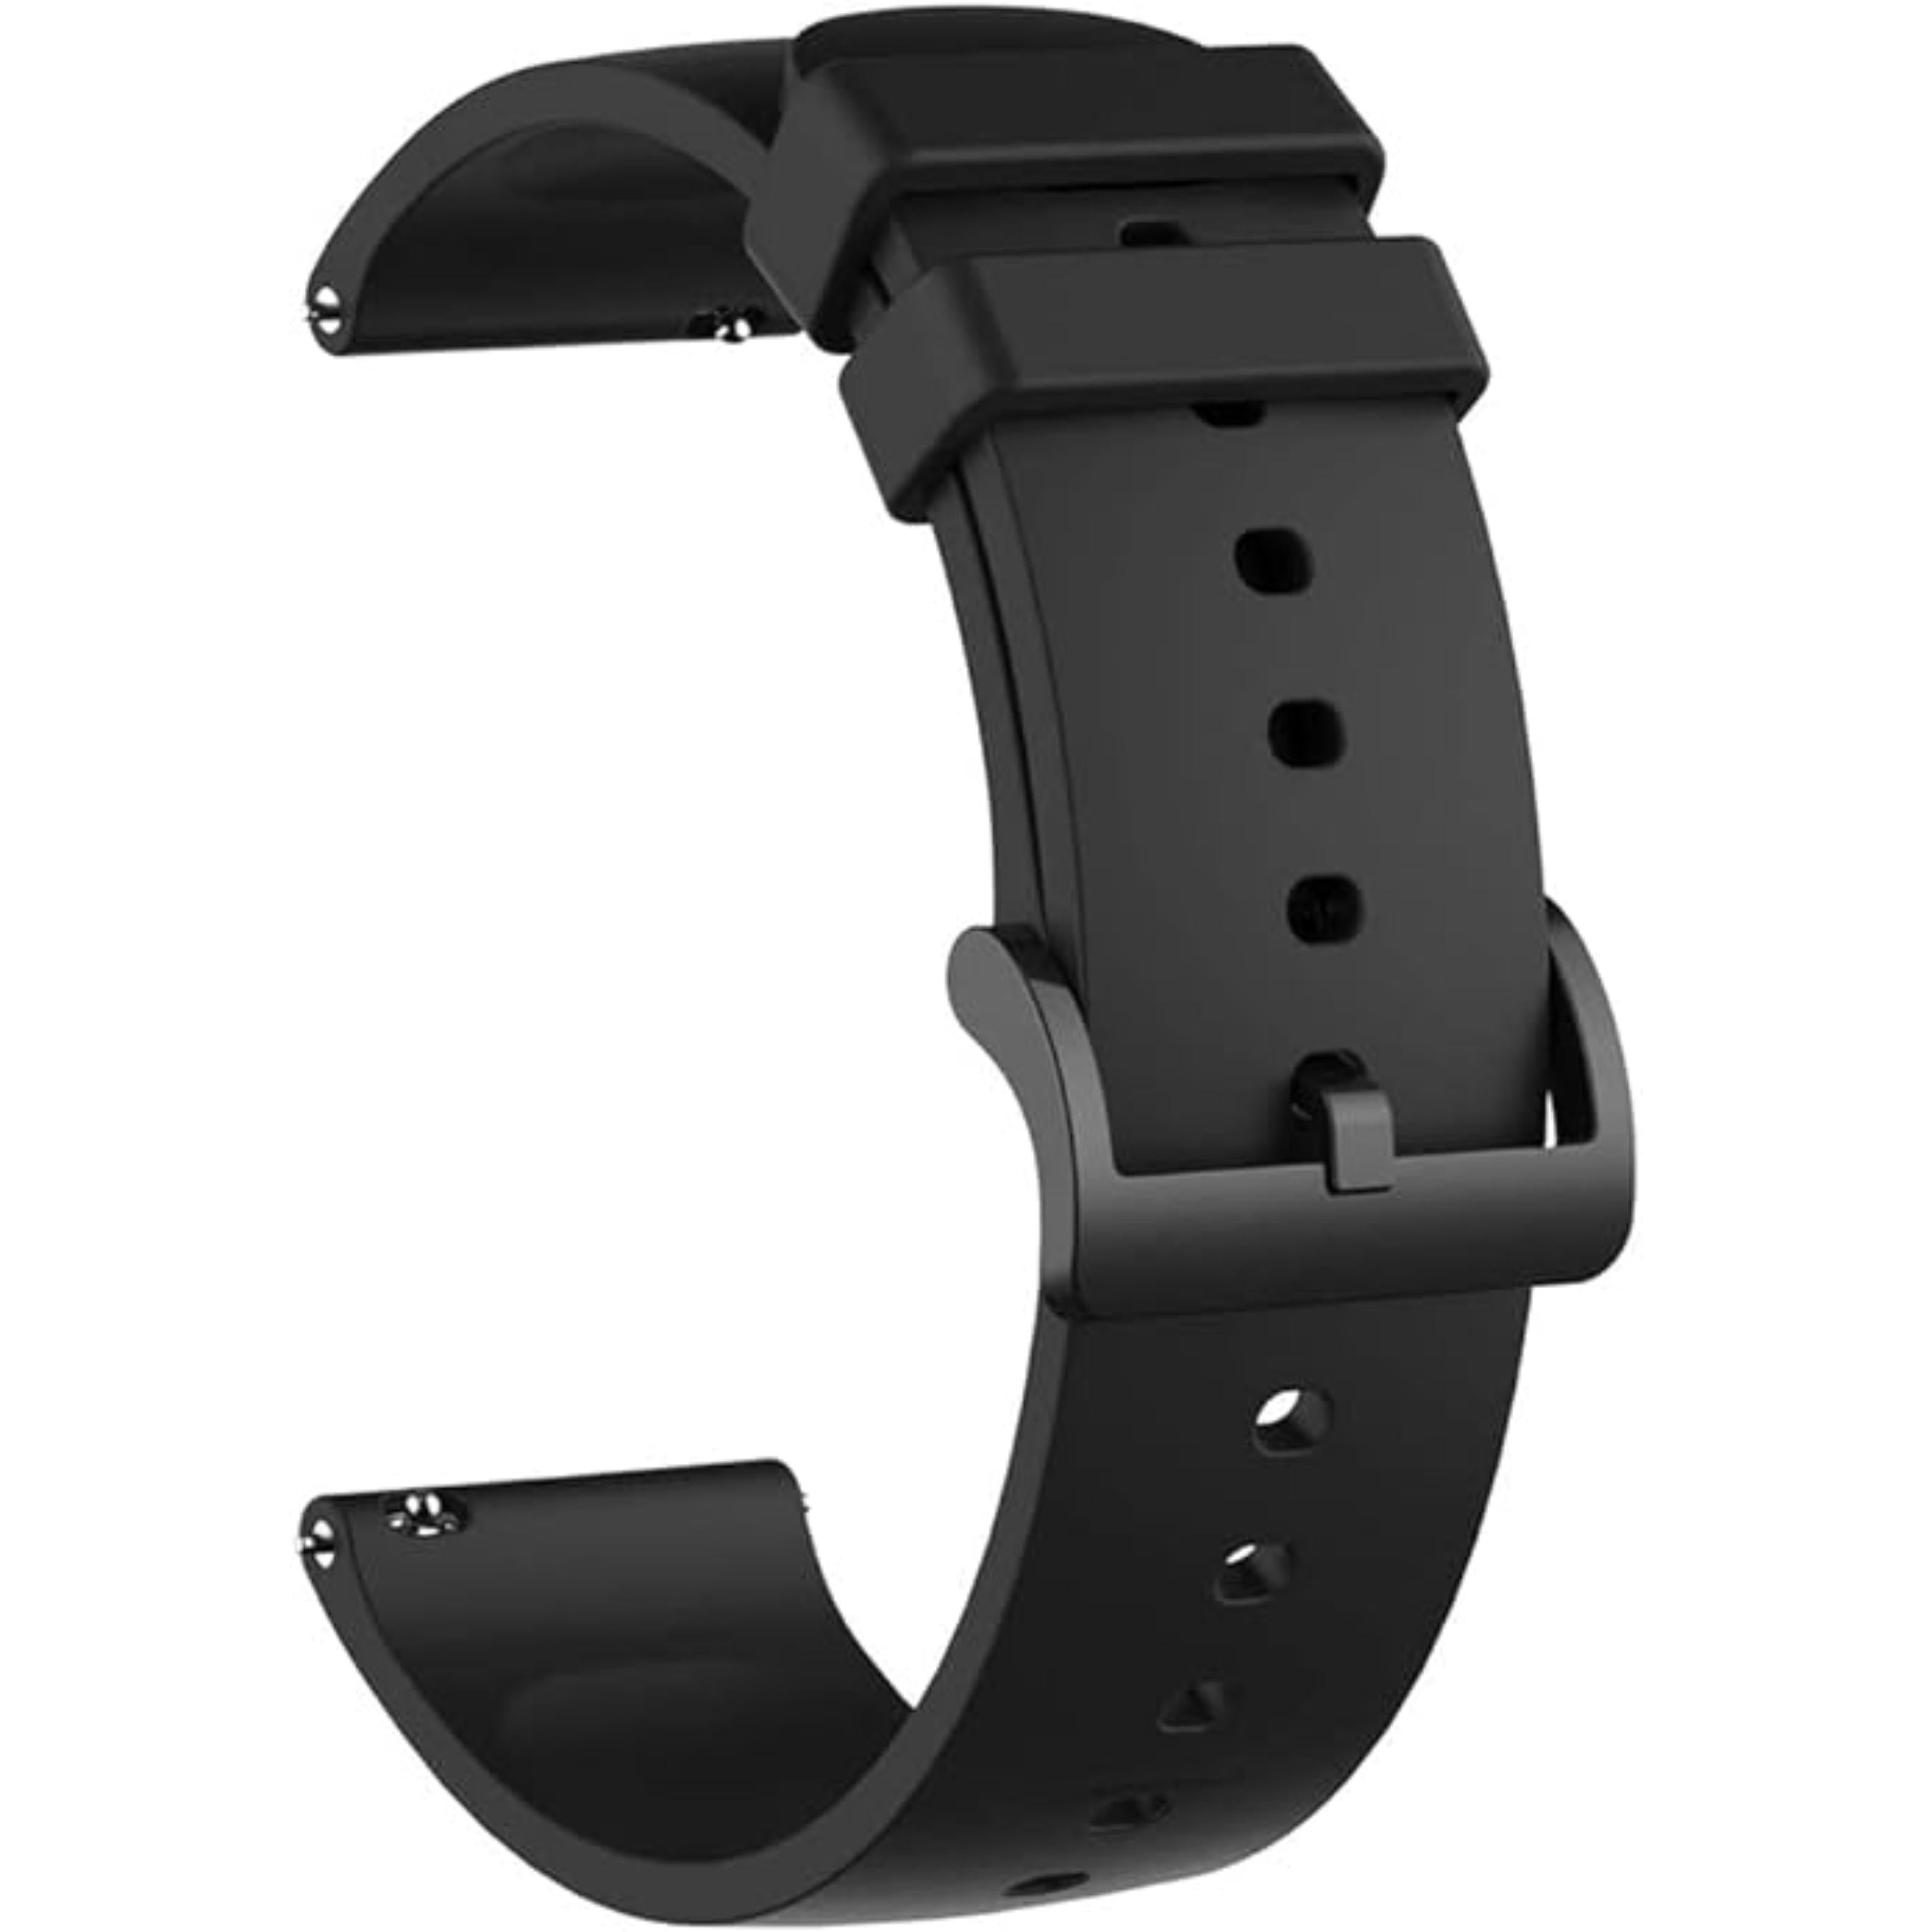 Lorenz Silicone 22MM Replacement Watch Strap With Buckle Lock Compatible with Boat Xtend, Boat Xtend Pro, Noise Colorfit Pulse 2 Max, Noise Pulse Go Buzz, Fireboltt Phoenix & all other Watches (Black)